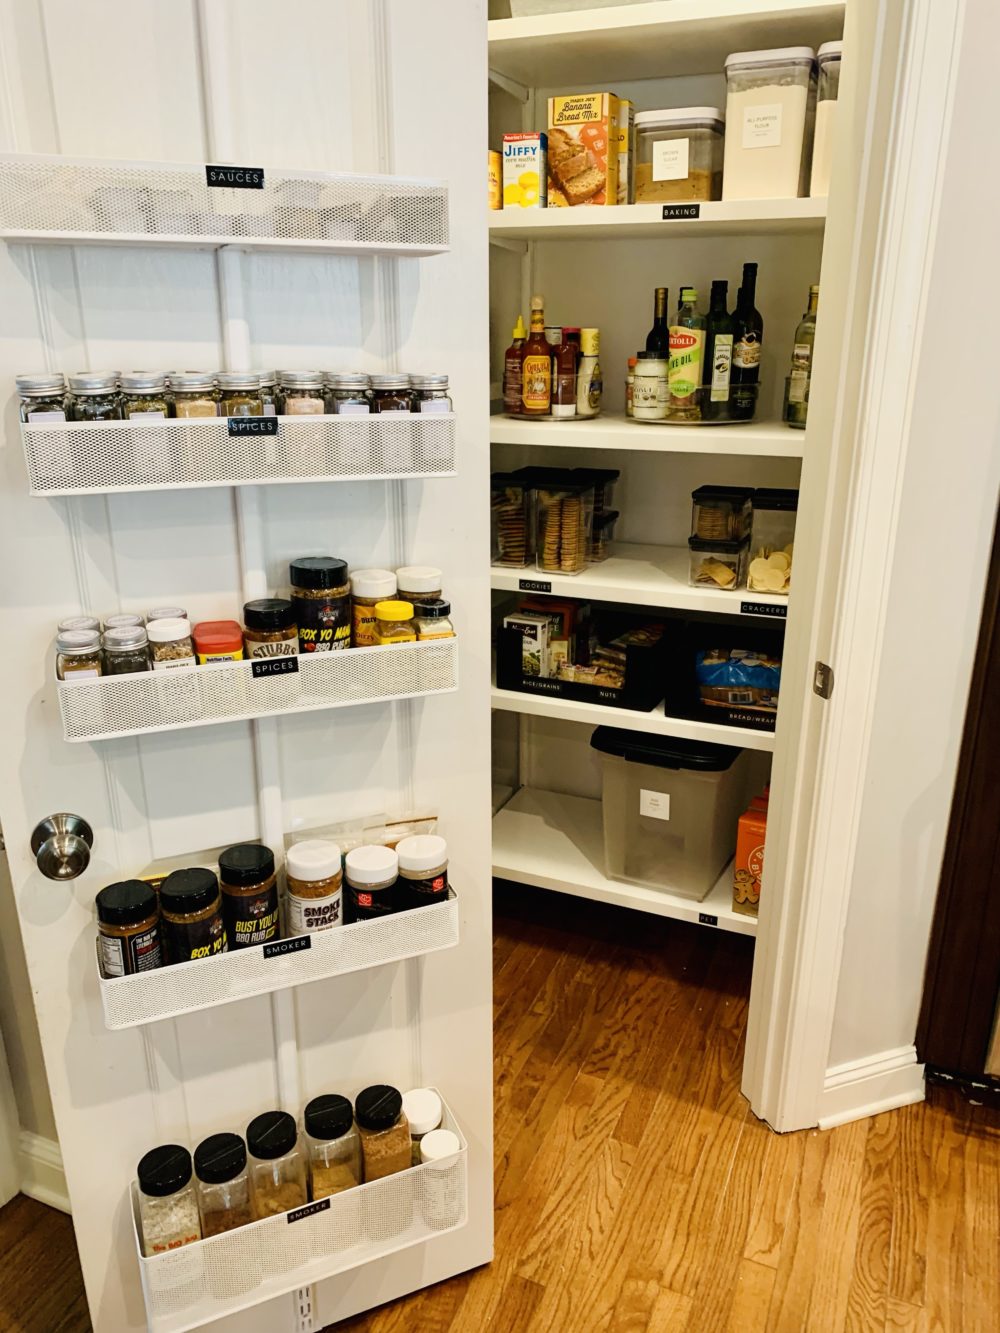 10 Clever Pantry Organization Tips to Maximize Space and Efficiency ...